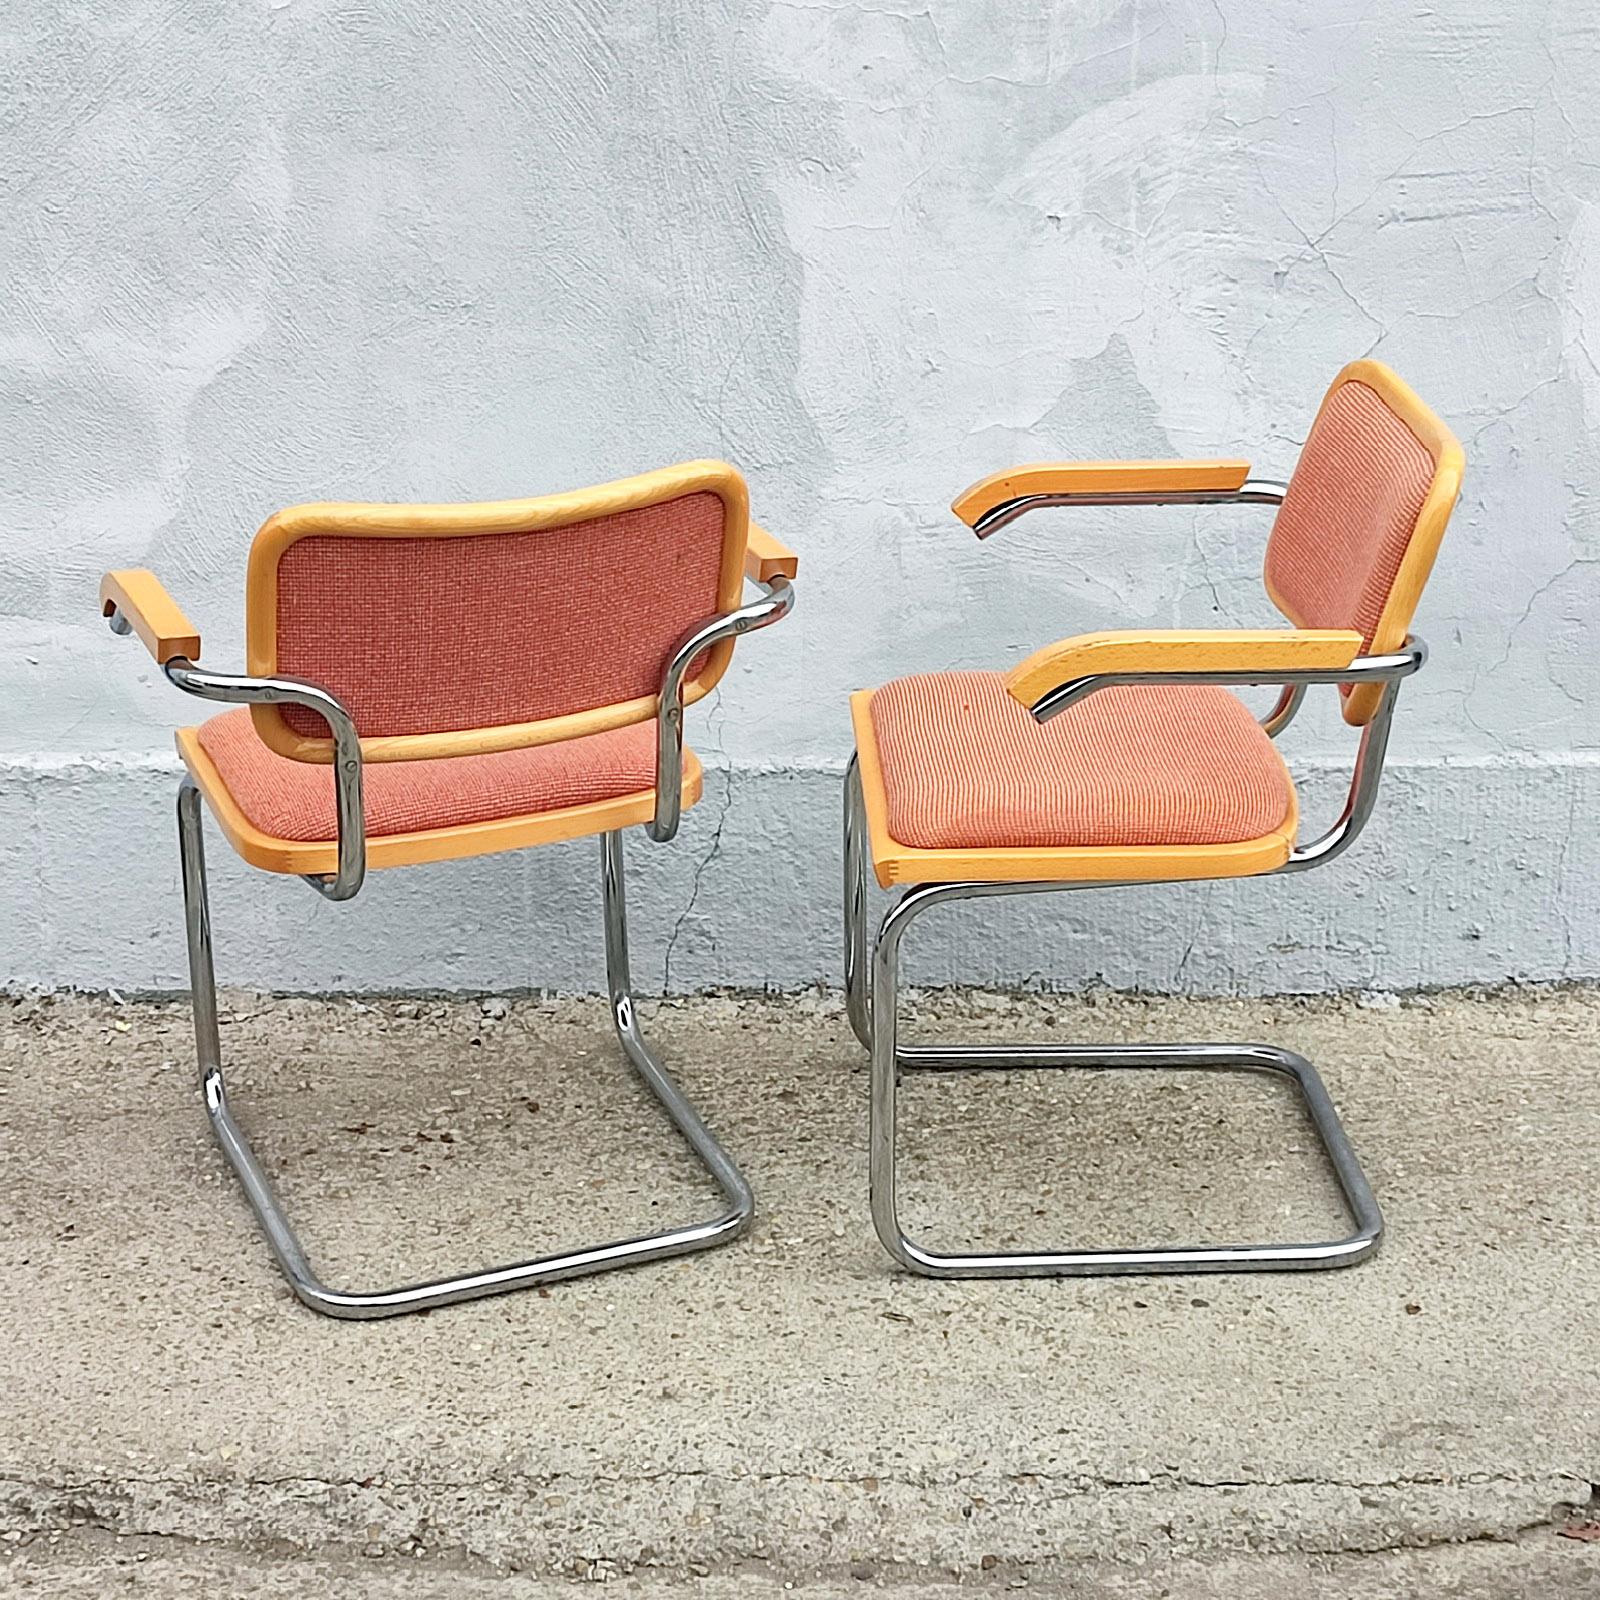 Pair of Wood Upholstery and Nickel Cesca Armchairs Chairs, 1970s For Sale 2